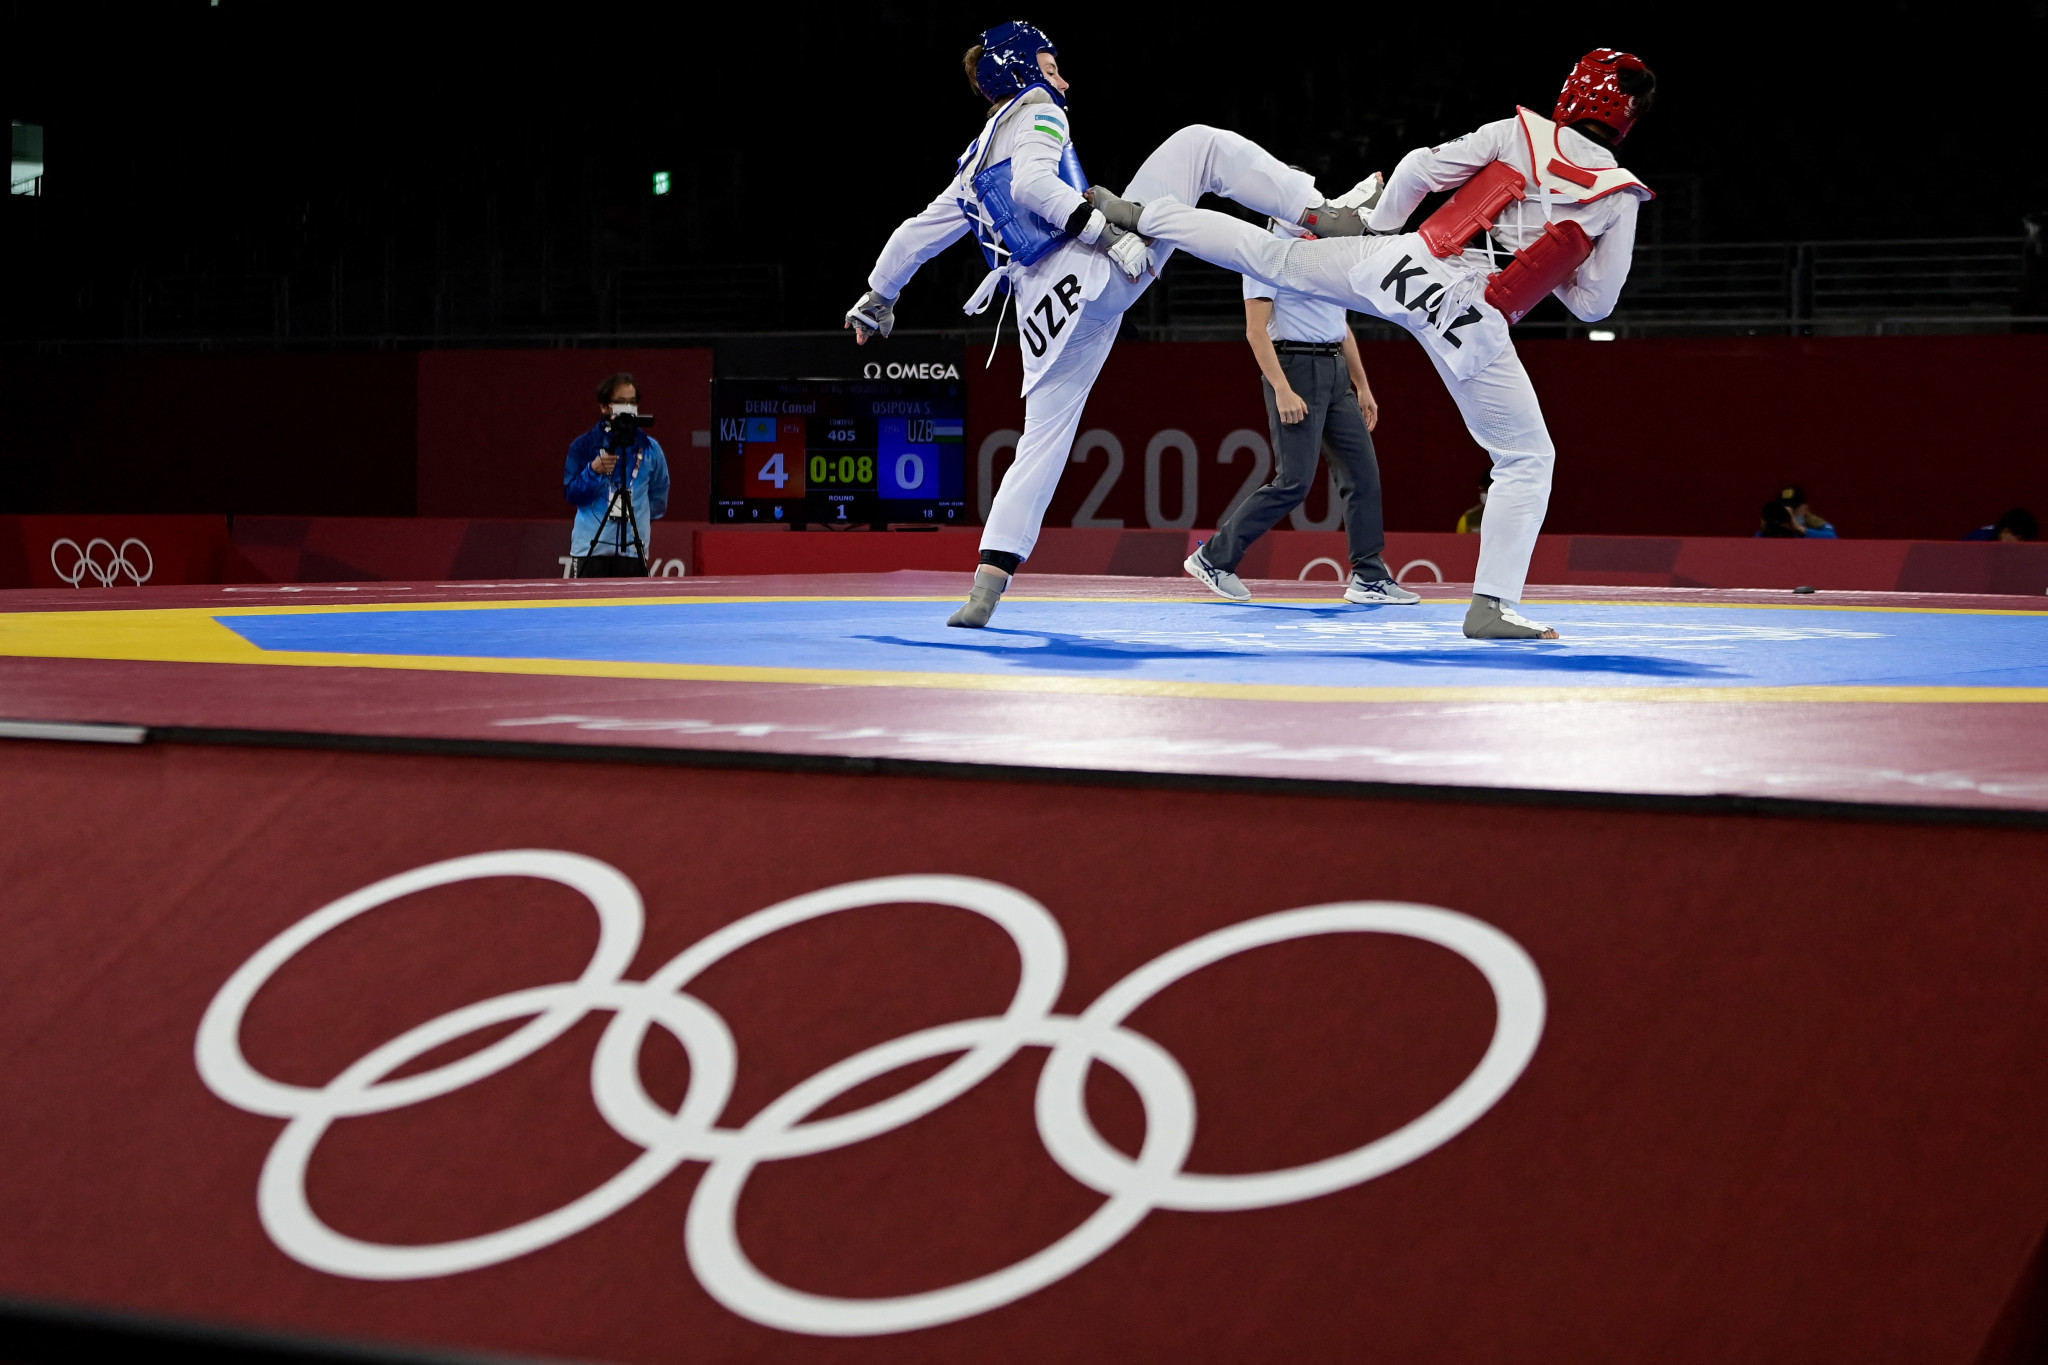 The Kazakhstan Taekwondo Federation reflected on its achievements from 2021 at its Annual Conference ©Getty Images